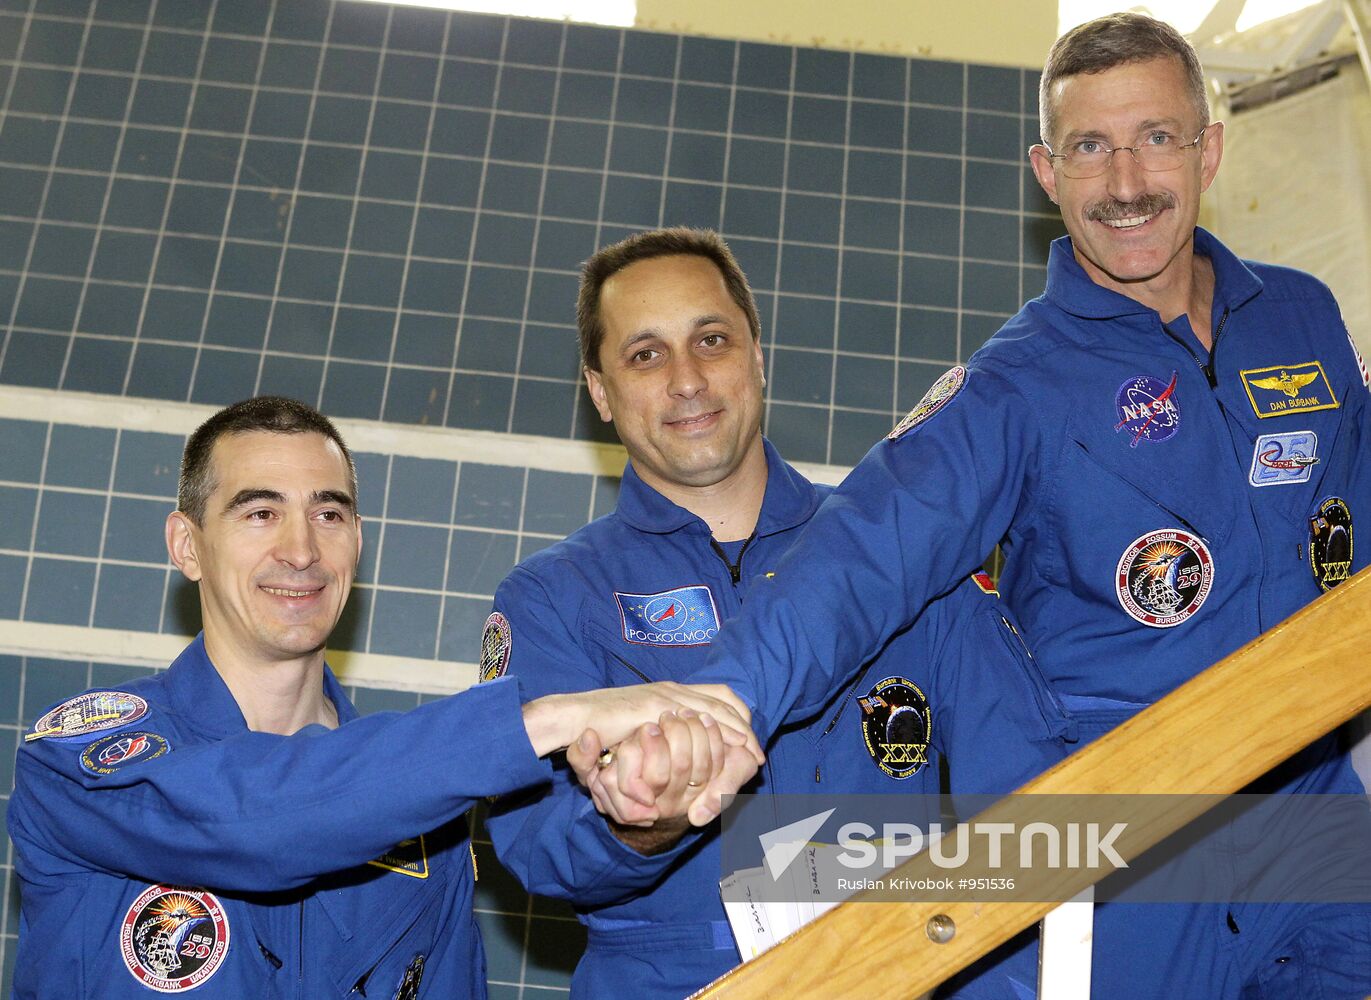 Crew with ISS 29/30th space expedition during training